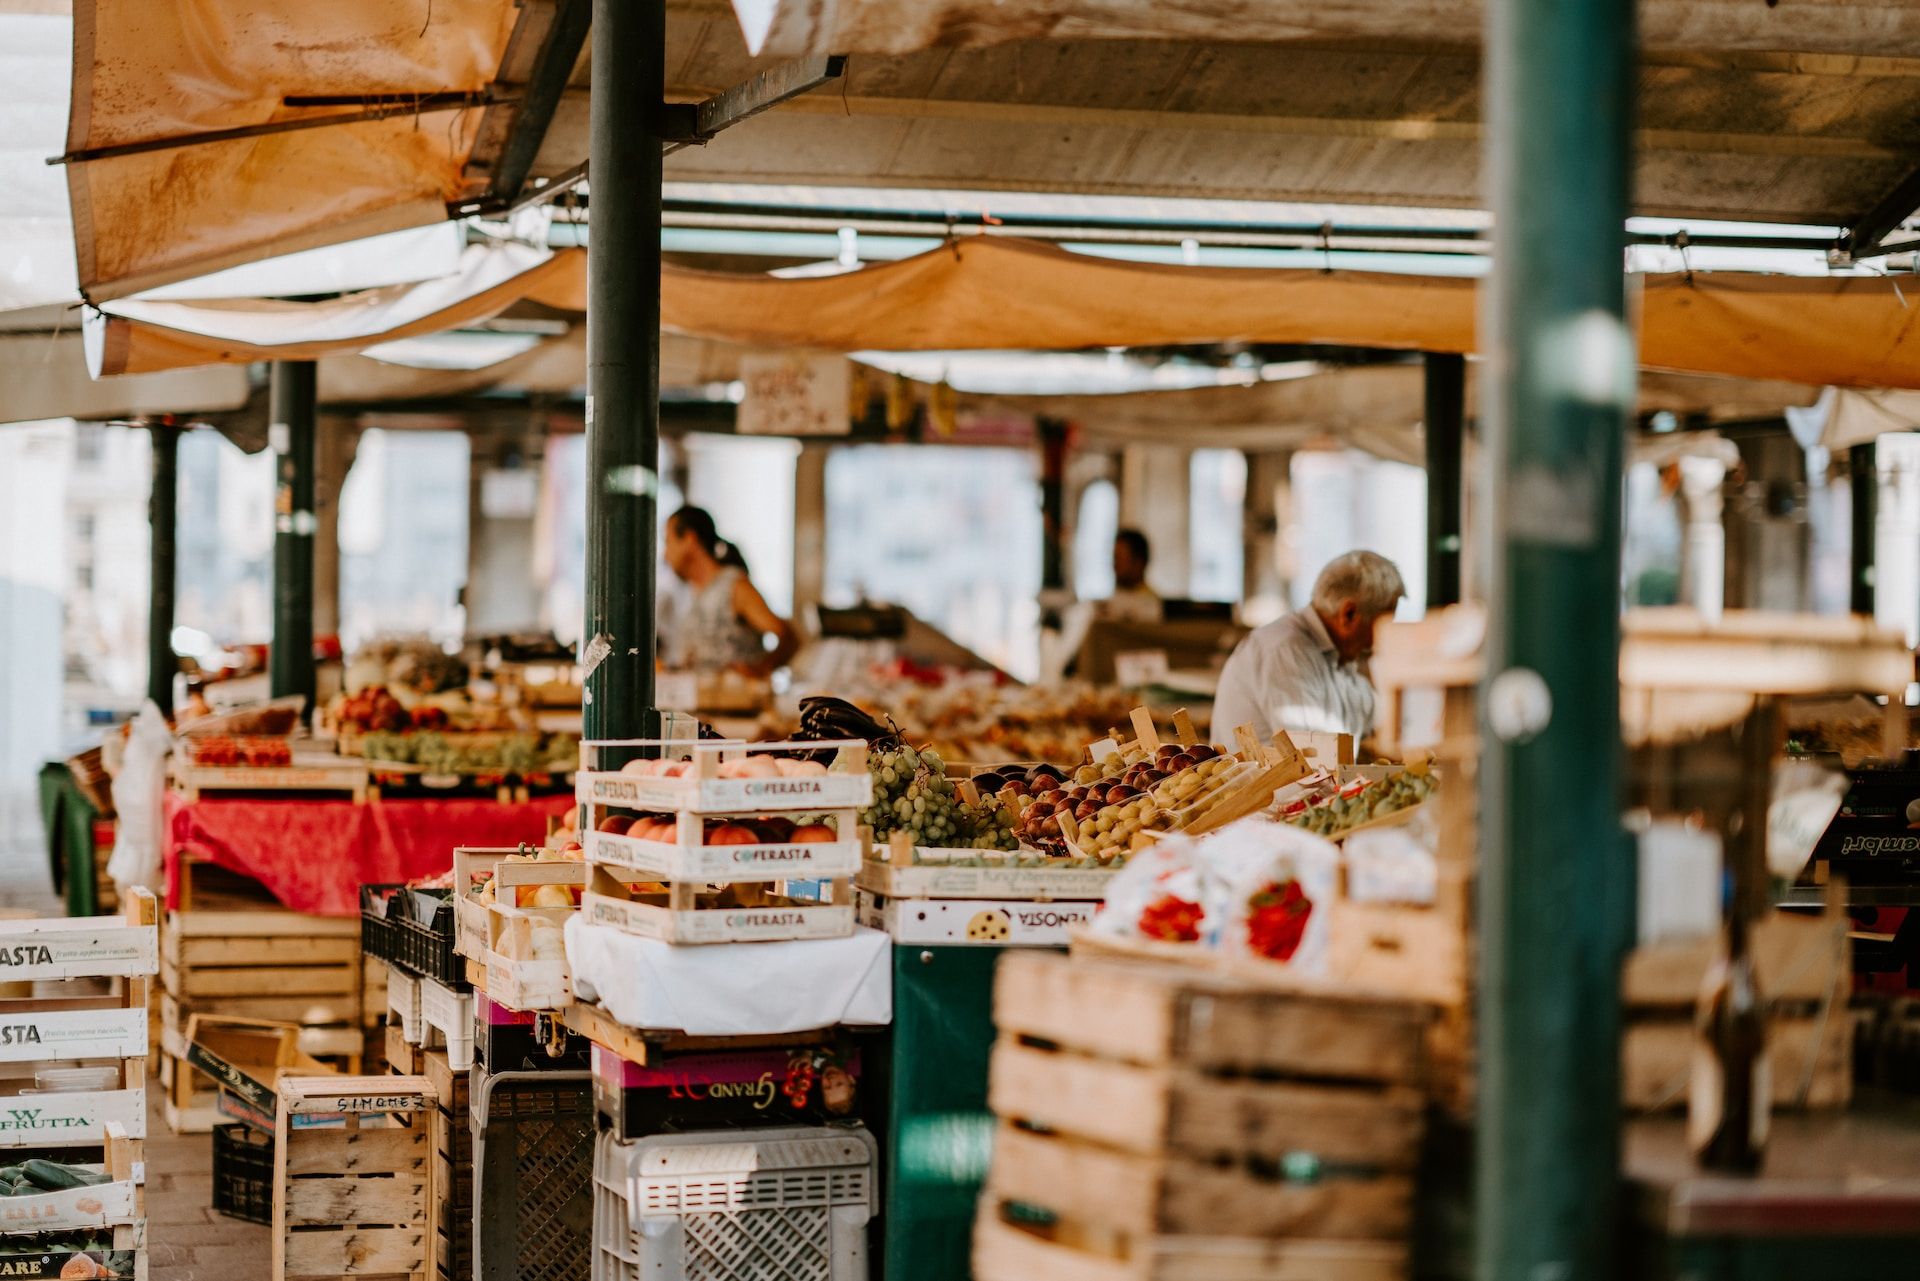 A local marketplace in Venice with fruit and vegetables